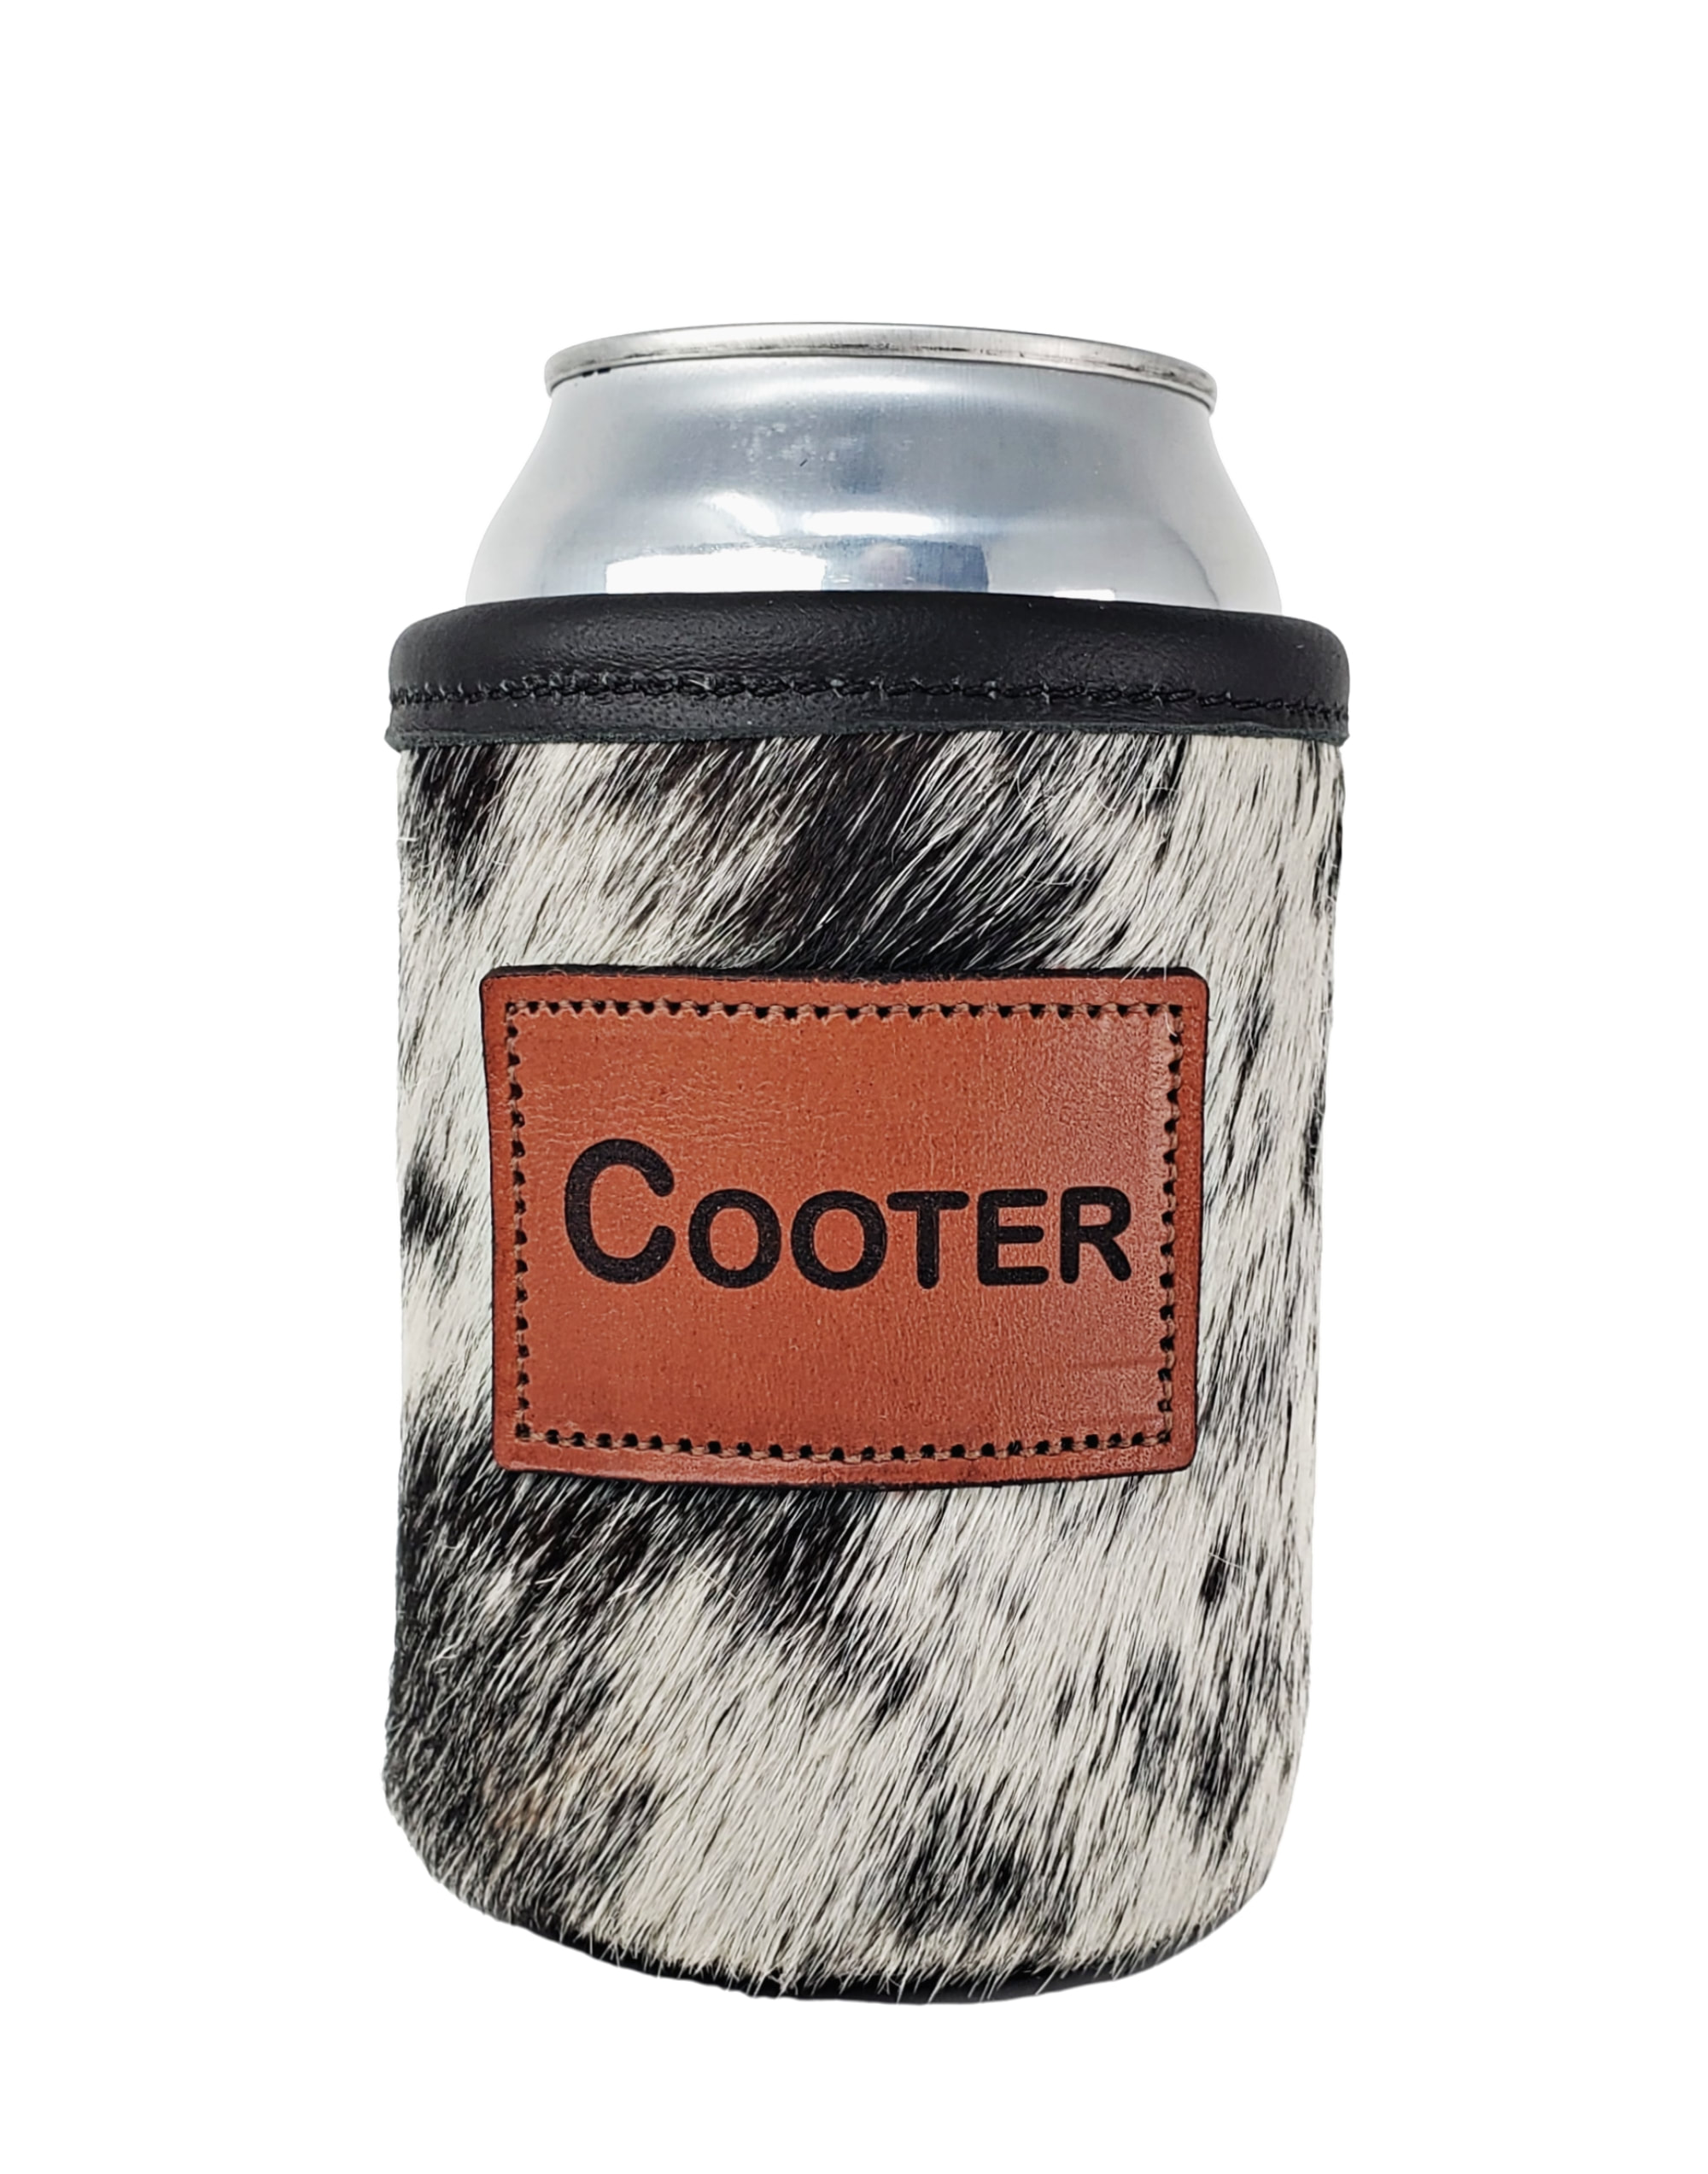 COORS LIGHT 2 BEER CAN HOLDERS COOLER COOZIE COOLIE KOOZIE HUGGIE NEW 